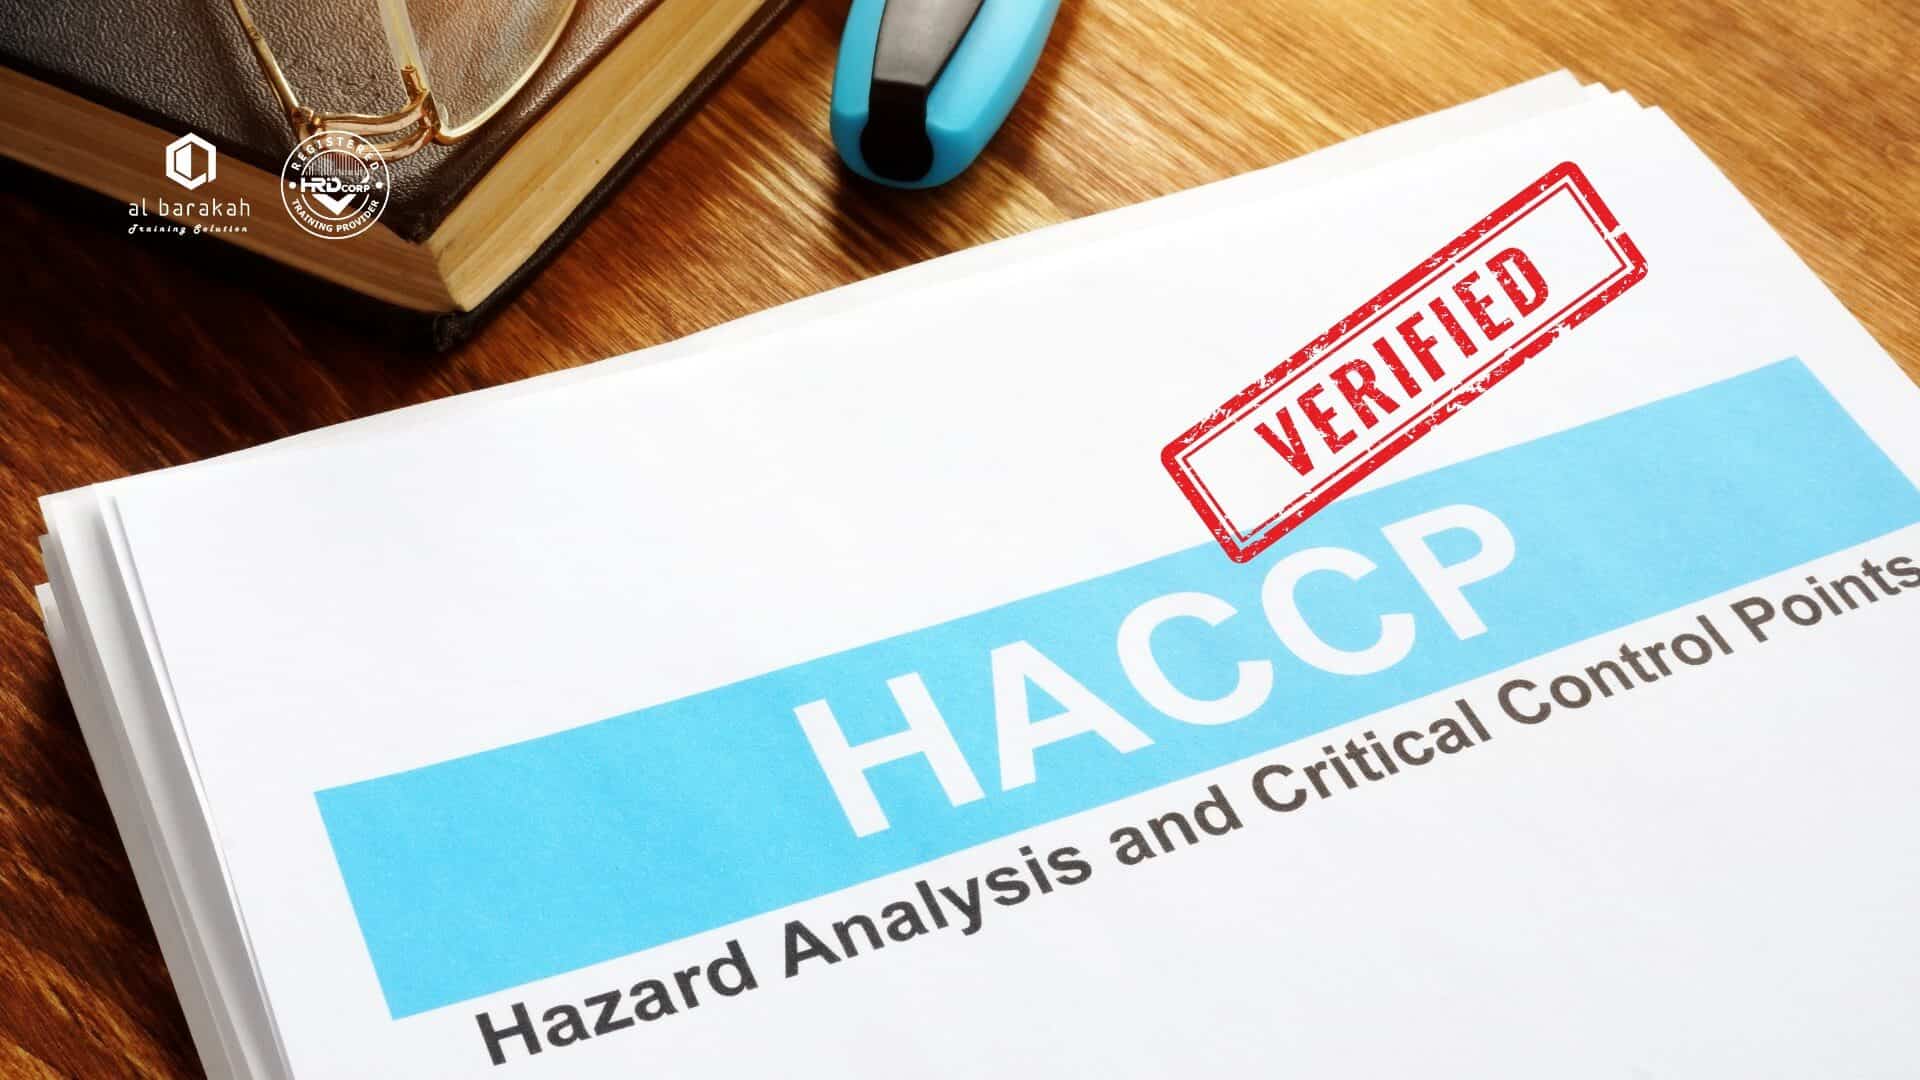 HACCP Training - Verification and Internal Auditing